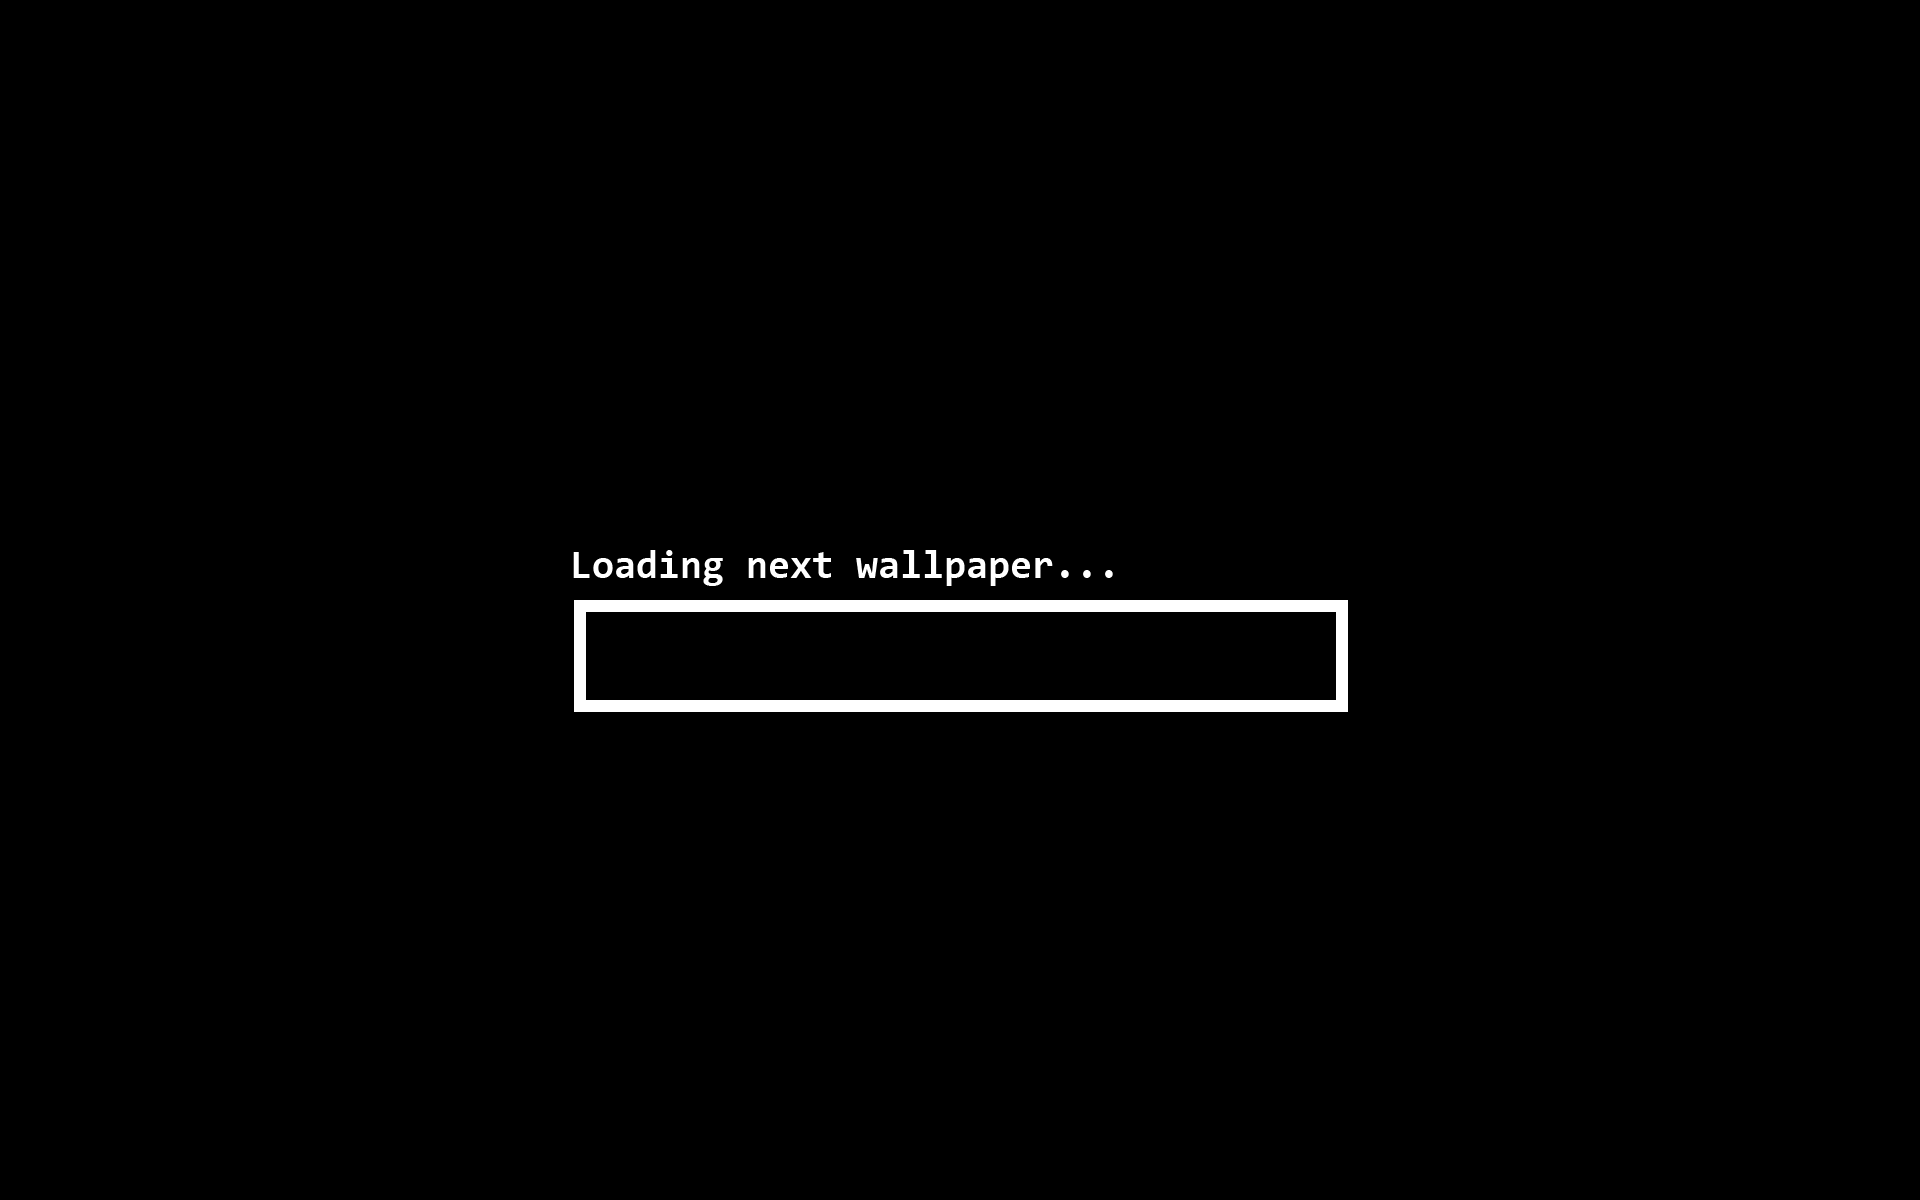  Loading Wallpaper 1m If You Can Use Animated Gifs For8230